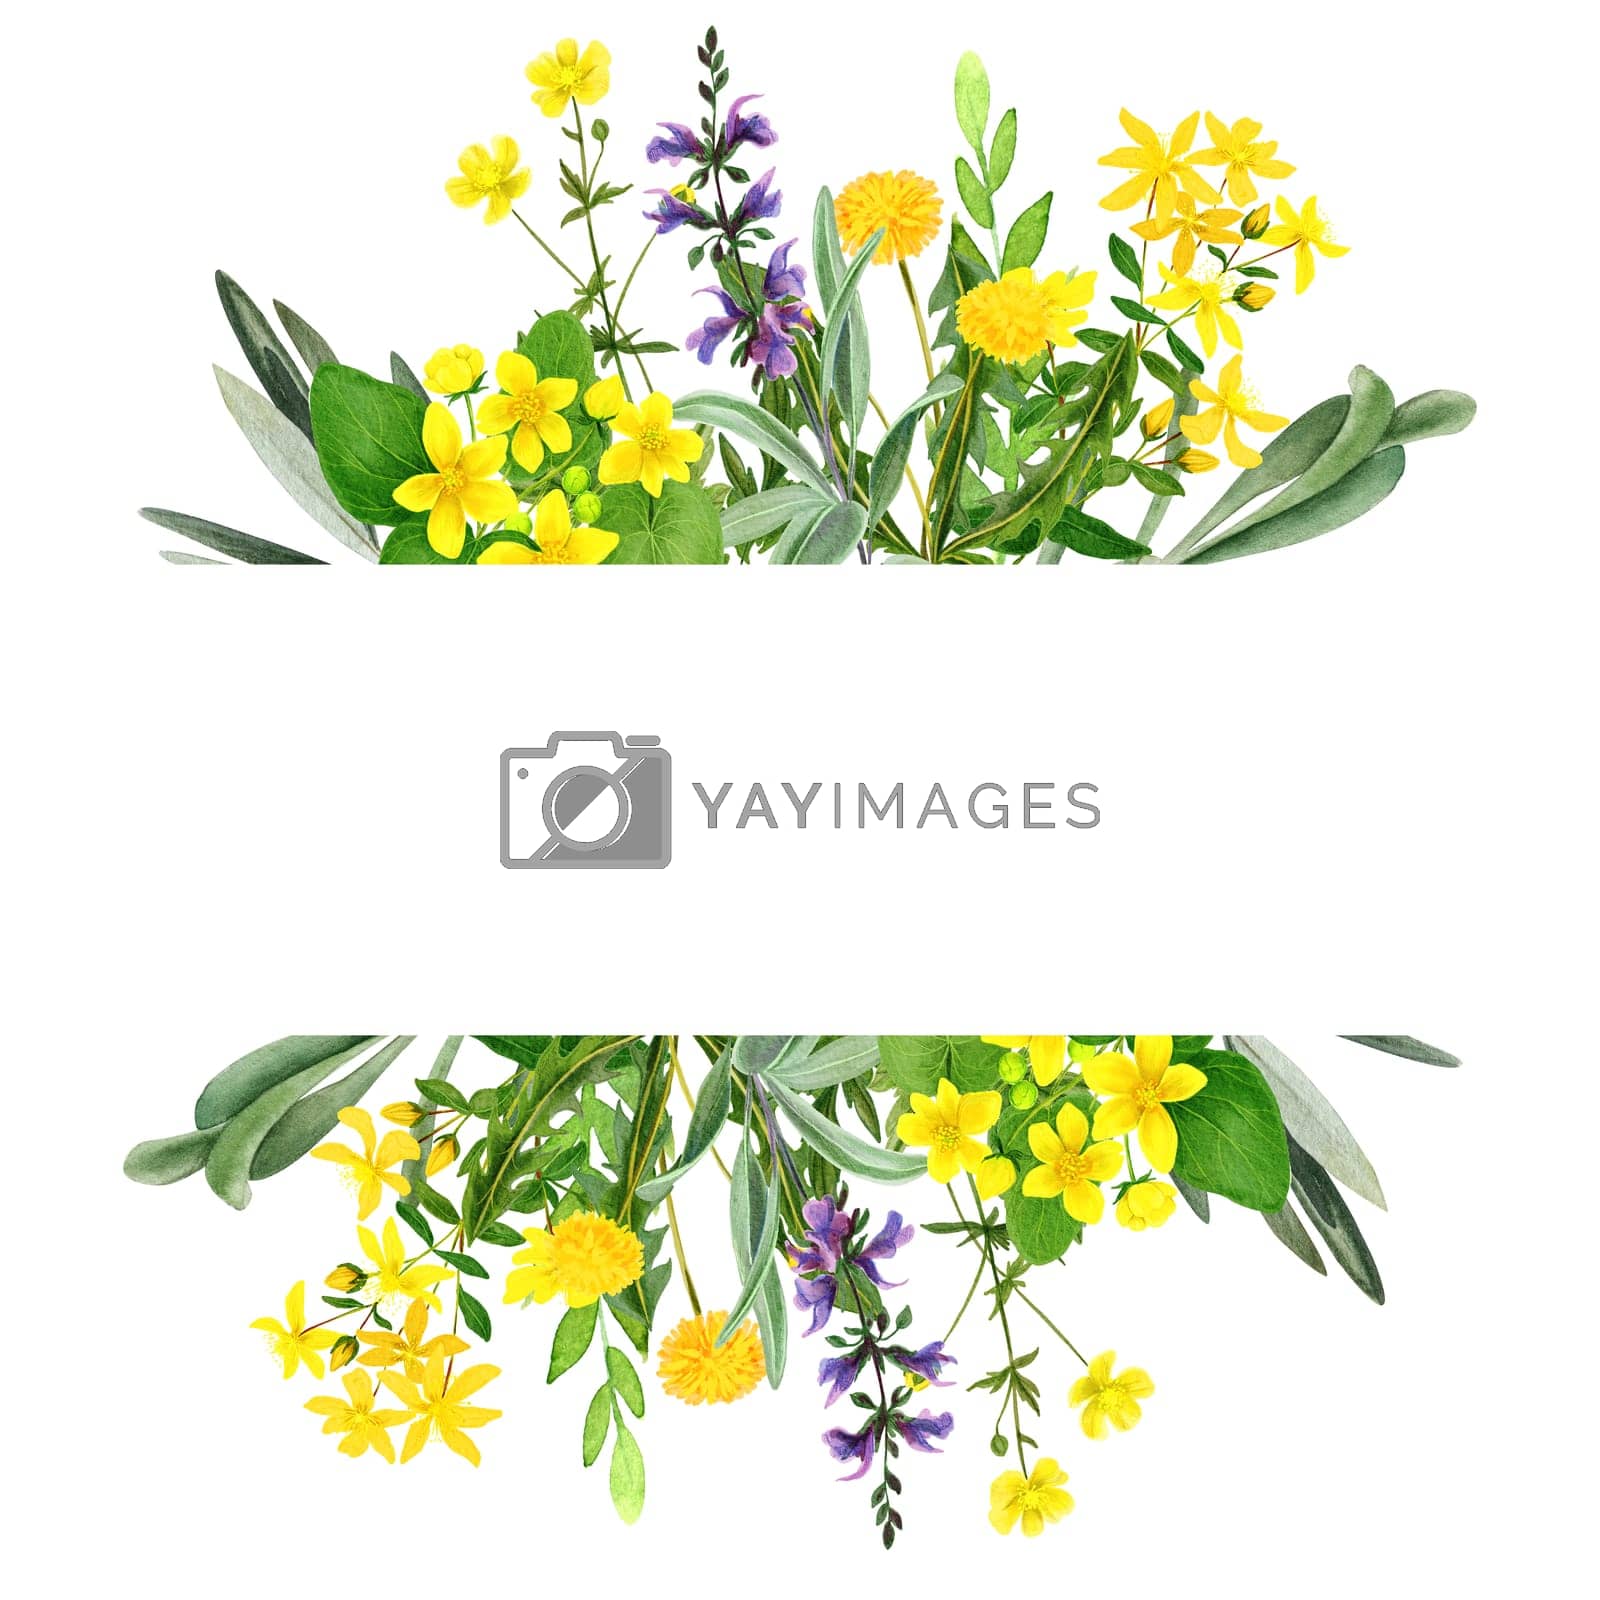 Royalty free image of Yellow field flowers, watercolor stripe banner, hand drawn by Julia_Solomatina_Art